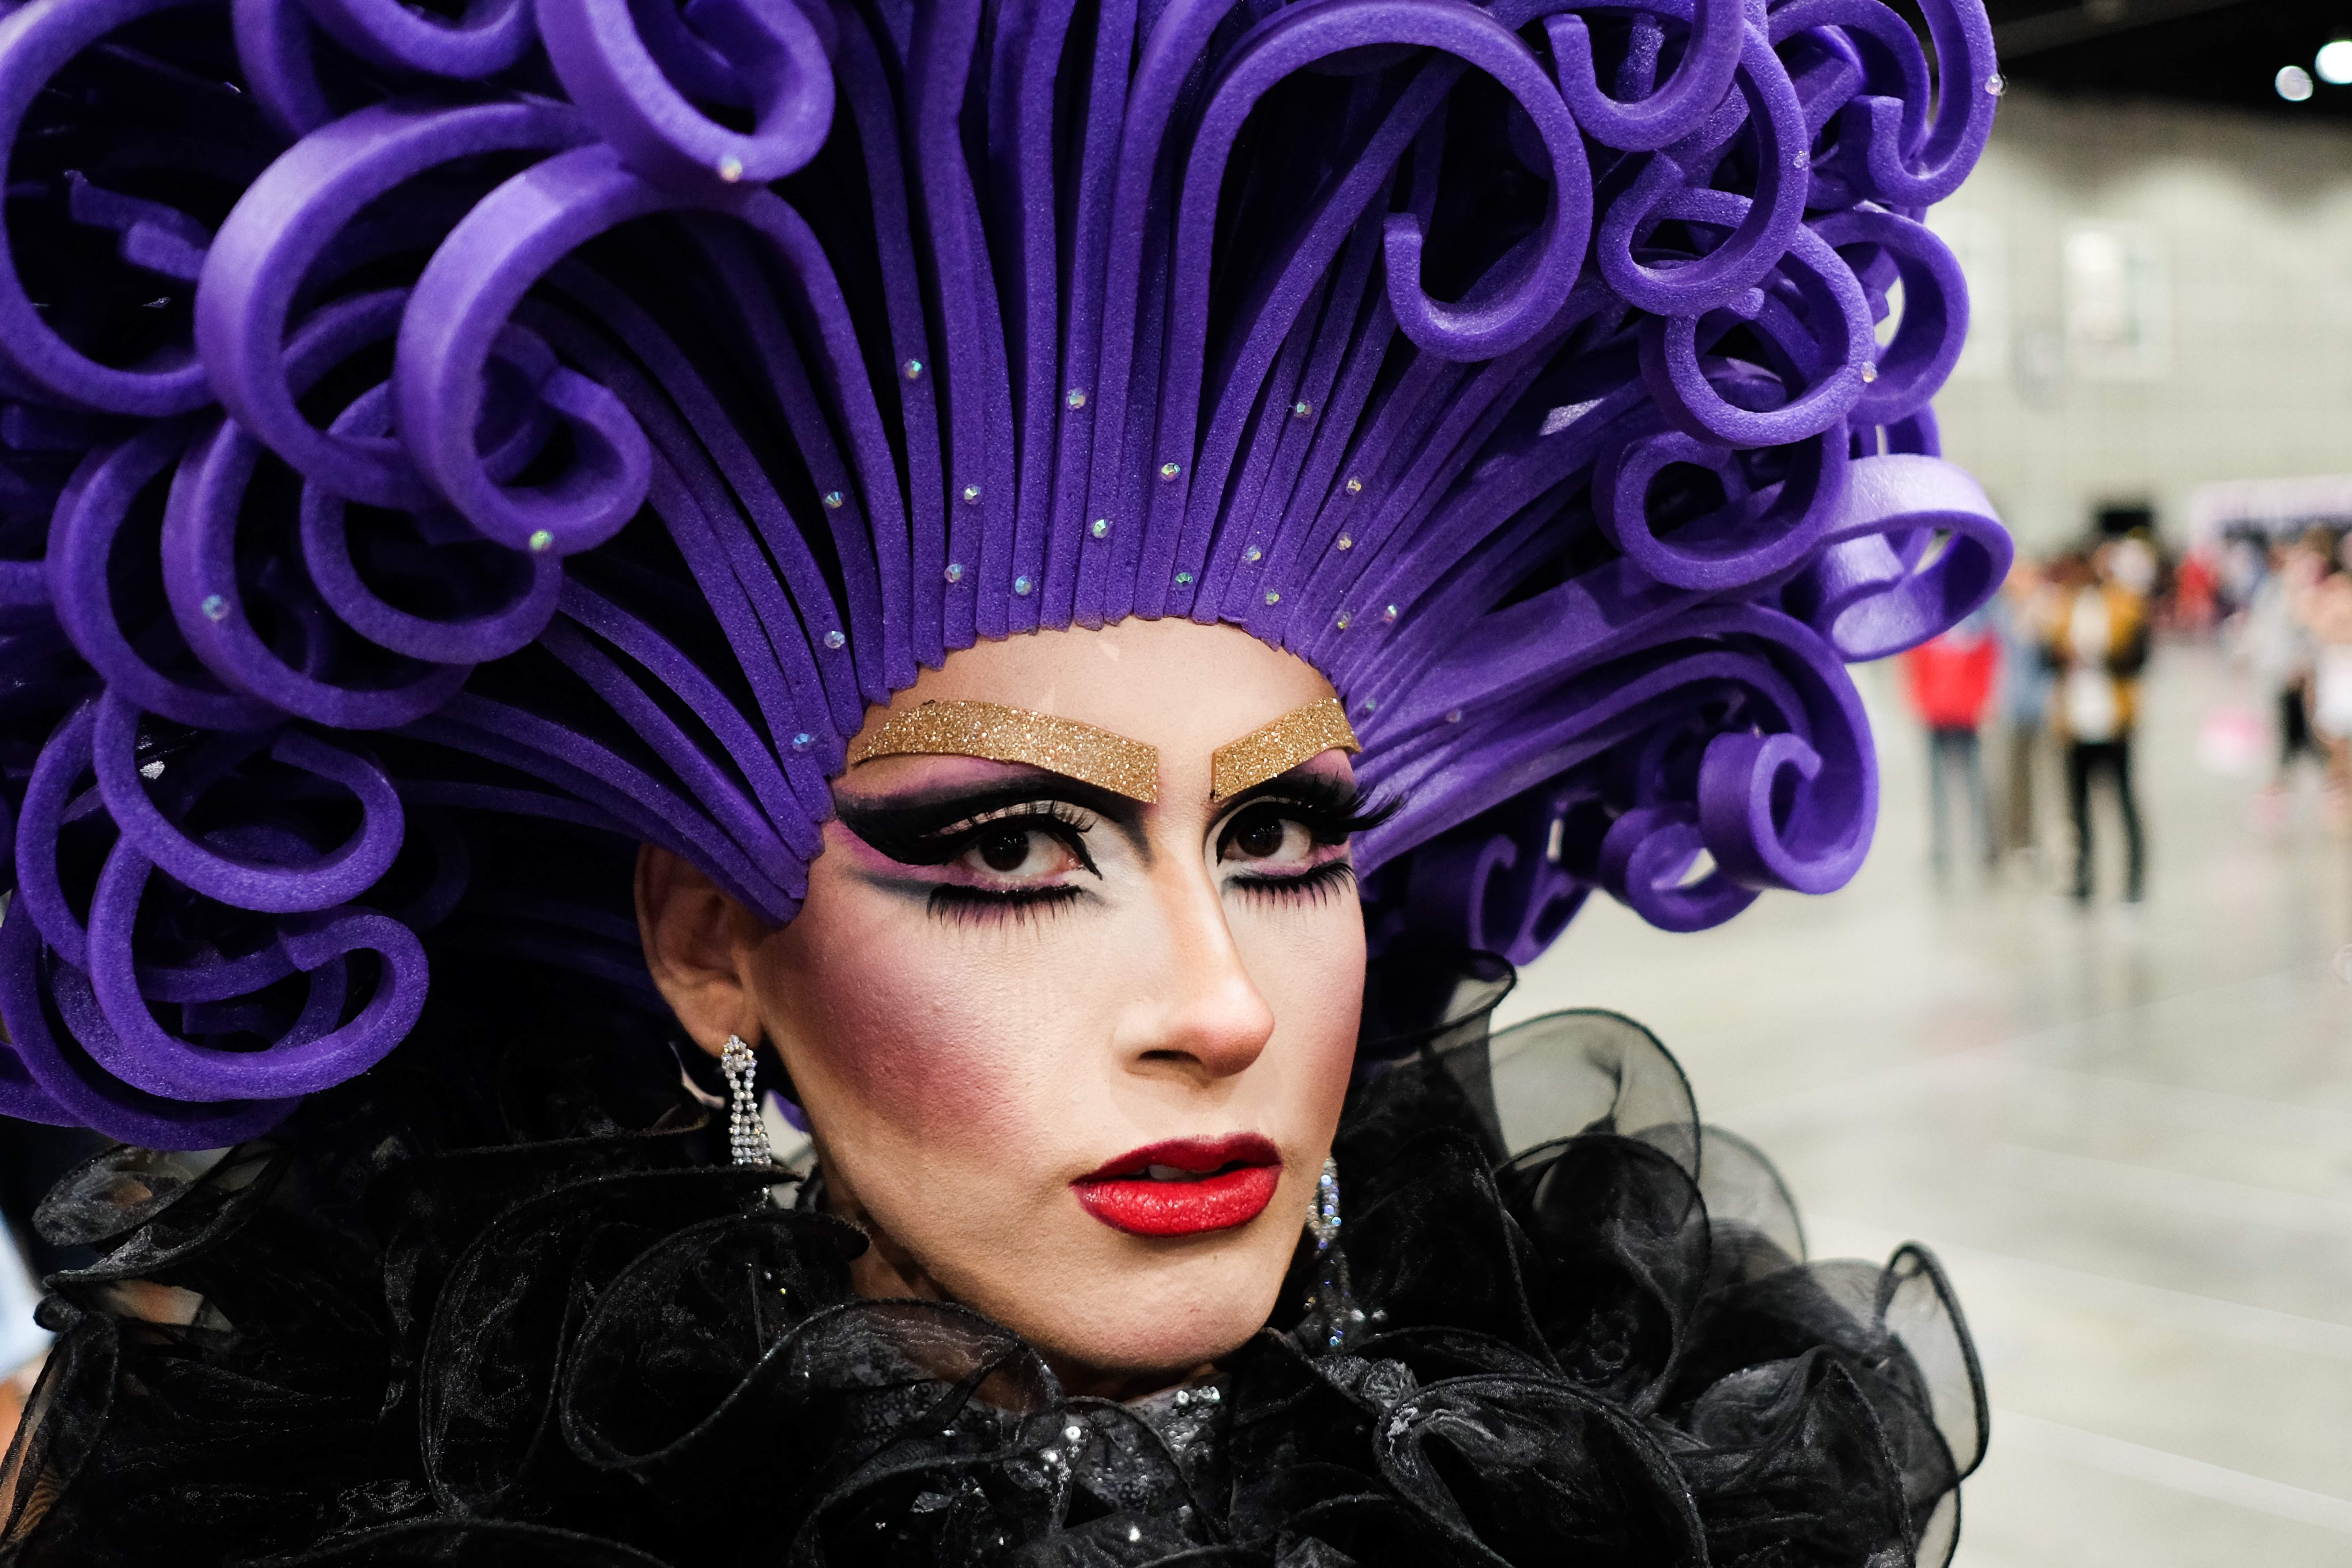 Photo of a drag queen with bright purple hair, red lipstick, and stage makeup.